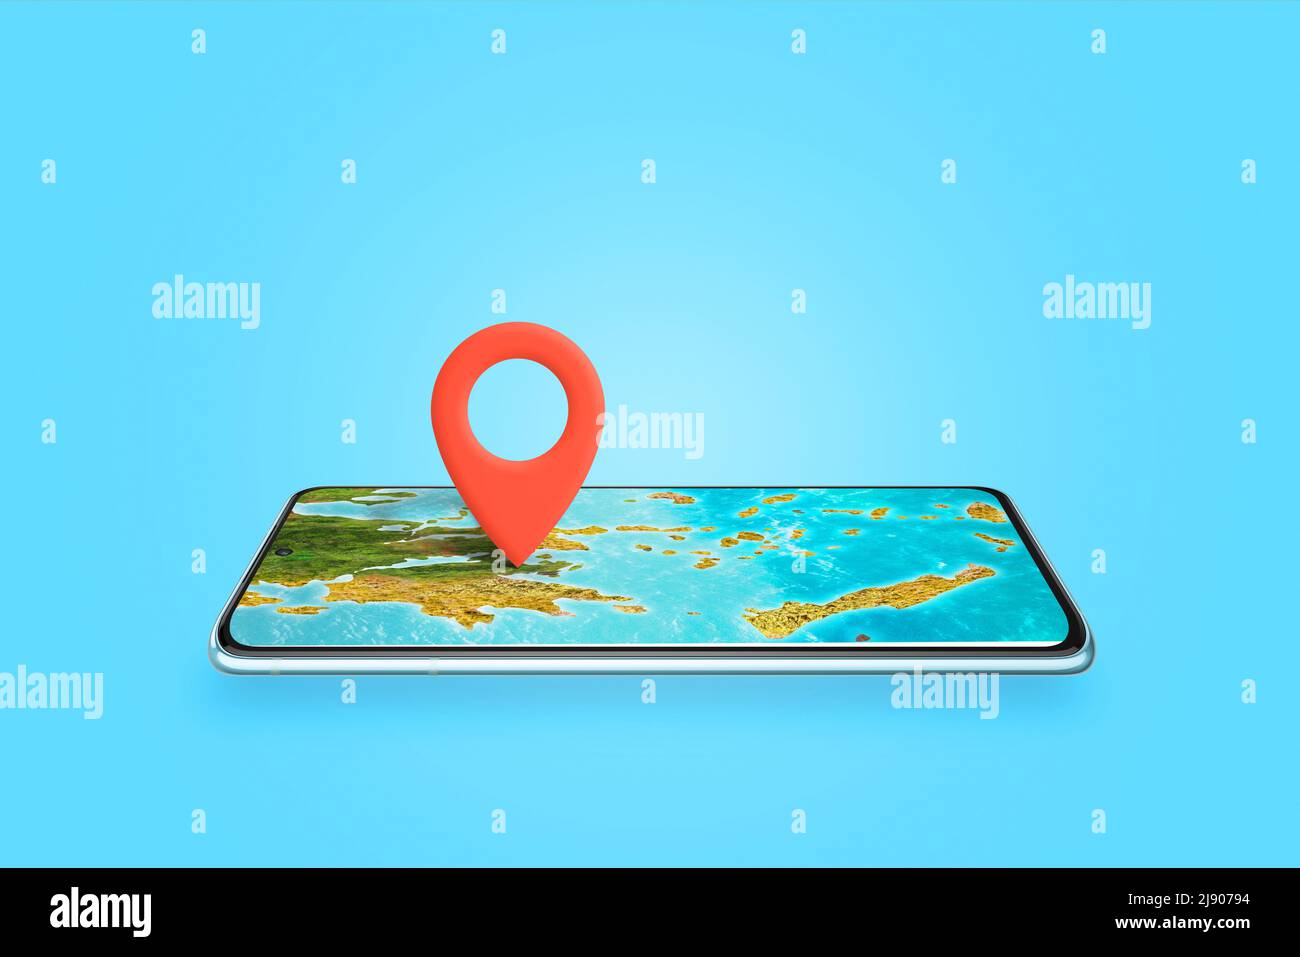 Phone as a map concept. Map pin pinned to the phone display where the map is located. The concept of summer travel and finding a holiday destination Stock Photo